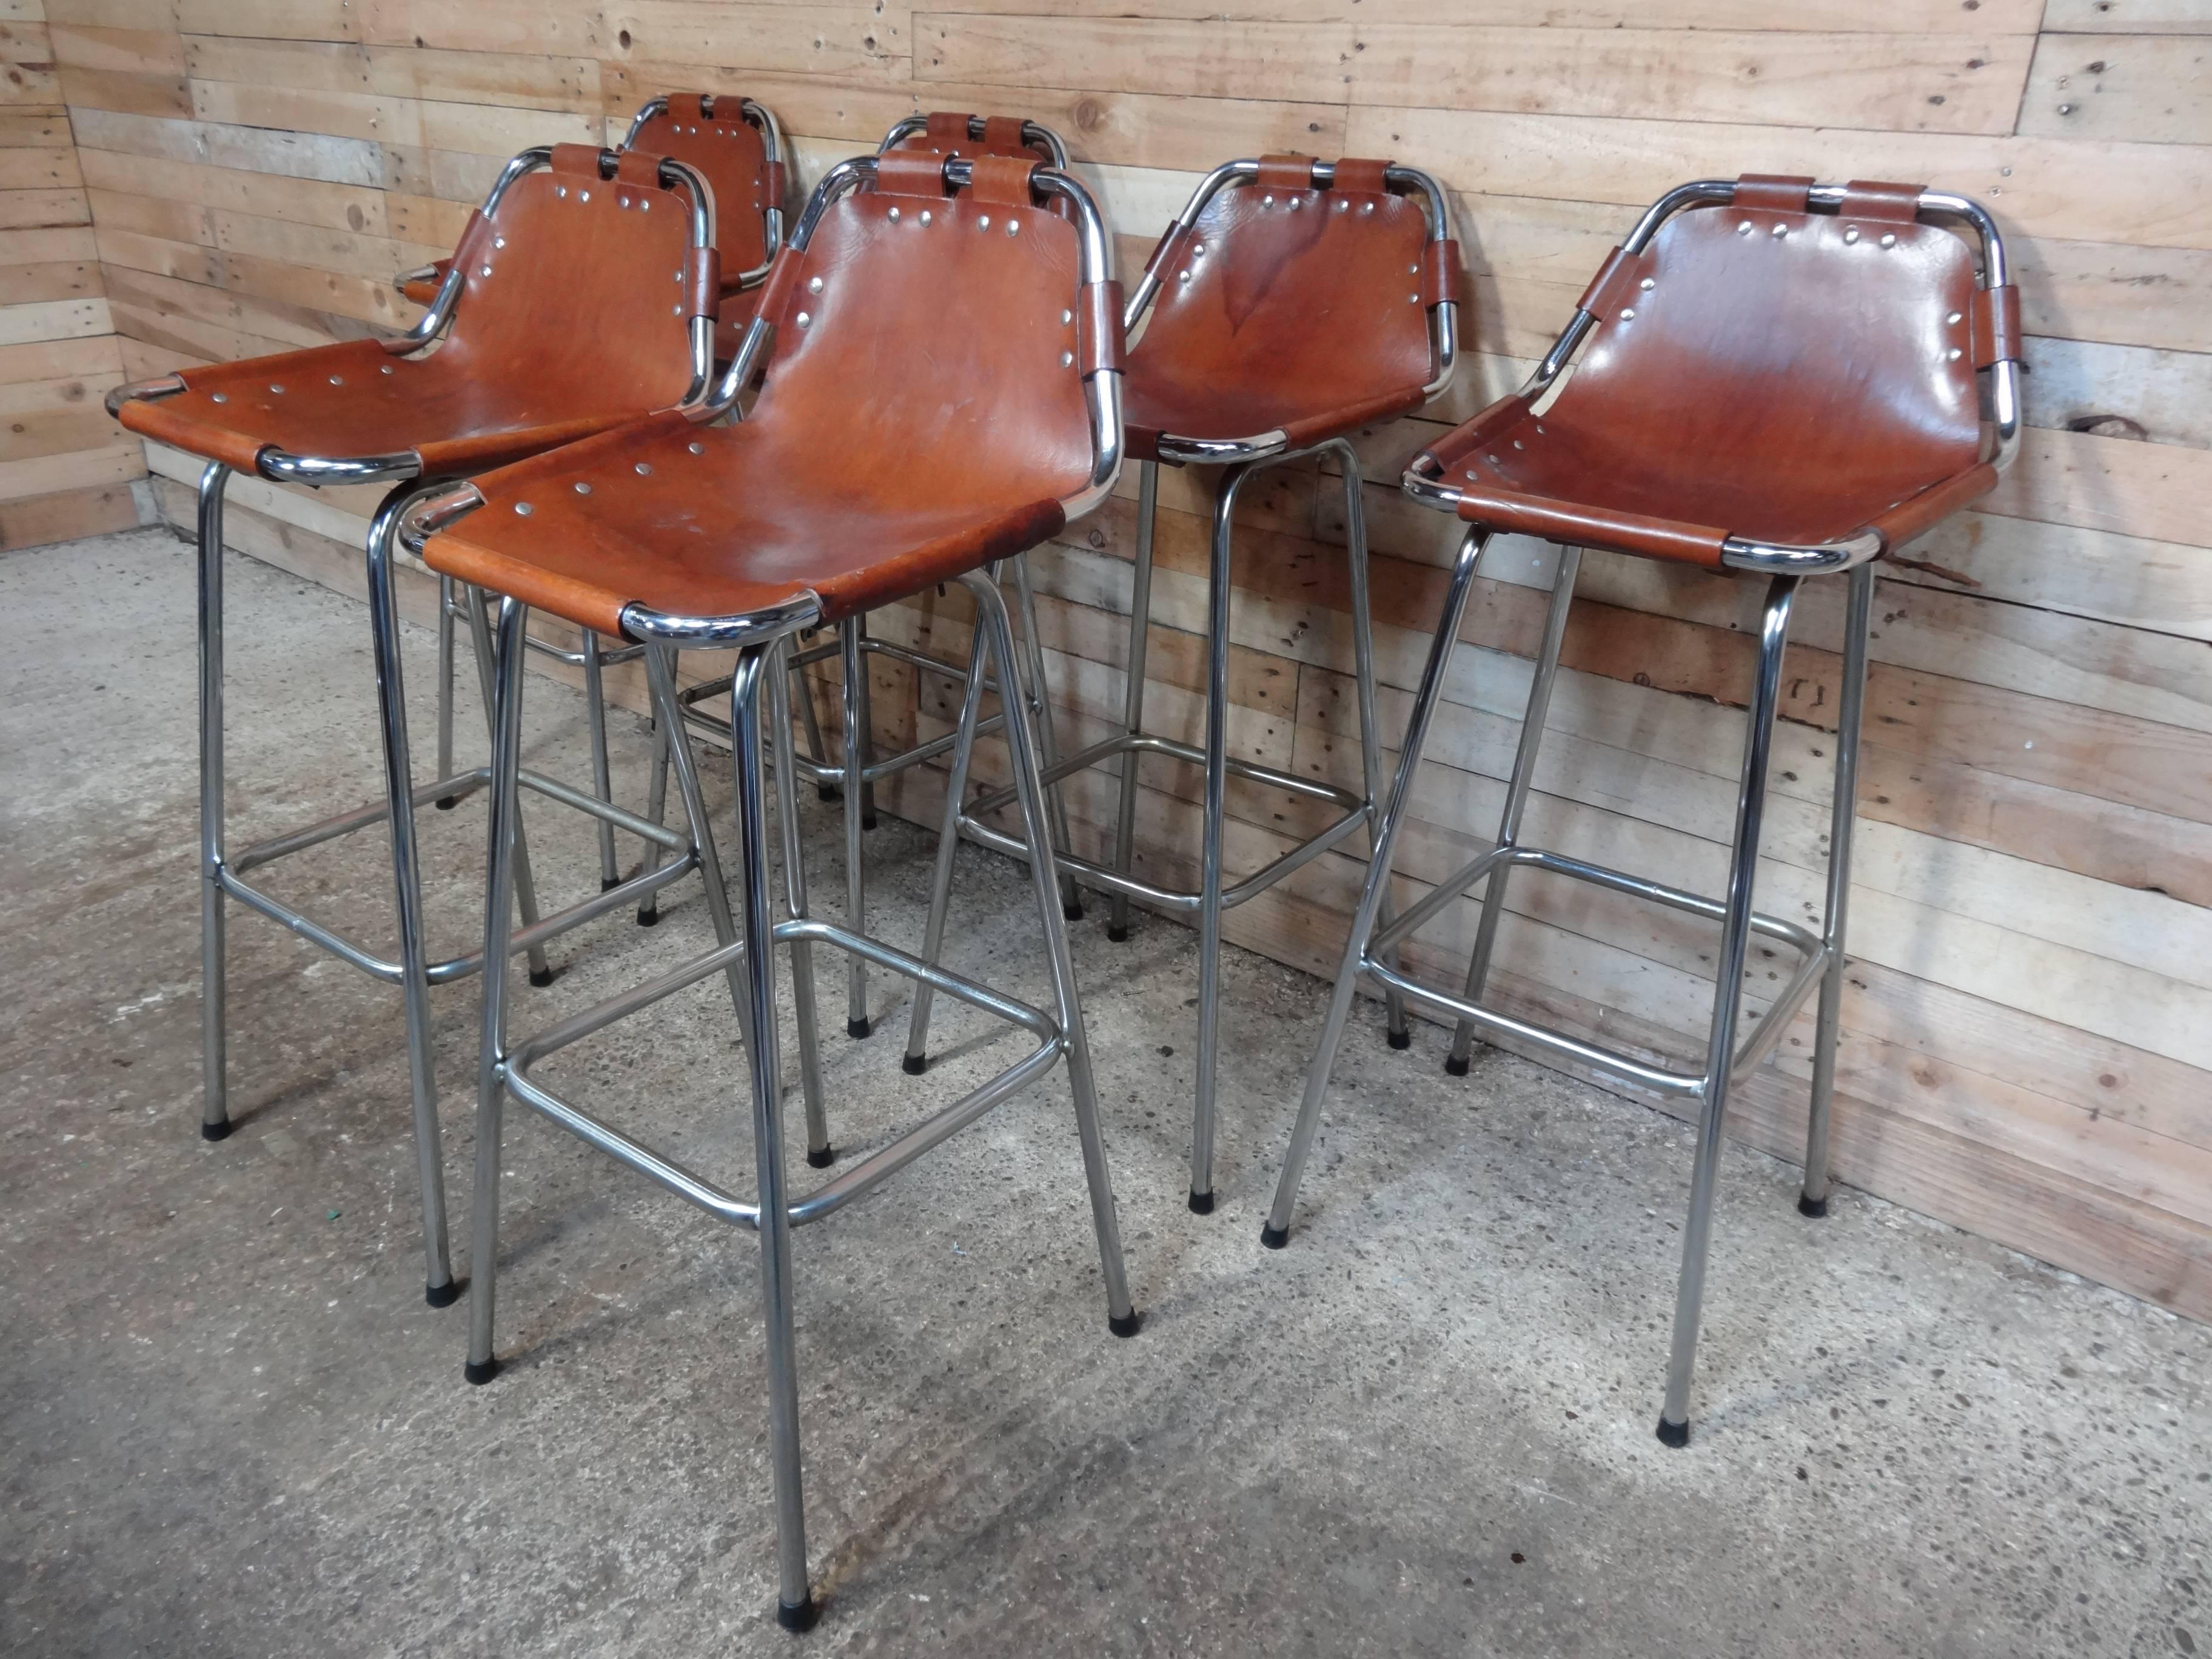 Stunning set of six stools, designer Charlotte Perriand used these in the Ski Resort Les Arcs, circa 1960. These stools were commissioned to be made by Cassina, one of the best Italian furniture maker’s very nice chrome tubular frame with thick